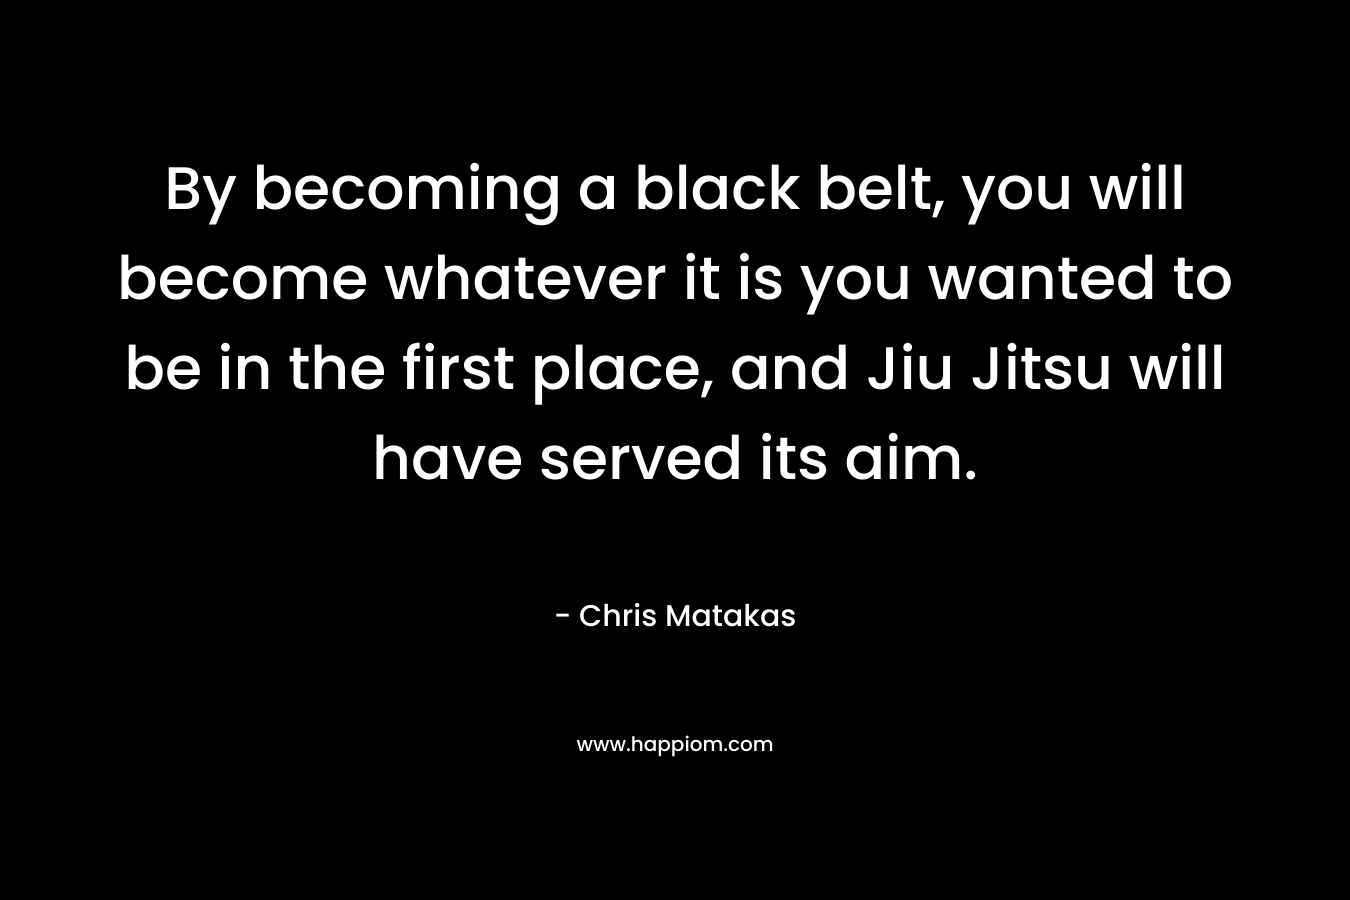 By becoming a black belt, you will become whatever it is you wanted to be in the first place, and Jiu Jitsu will have served its aim. – Chris Matakas